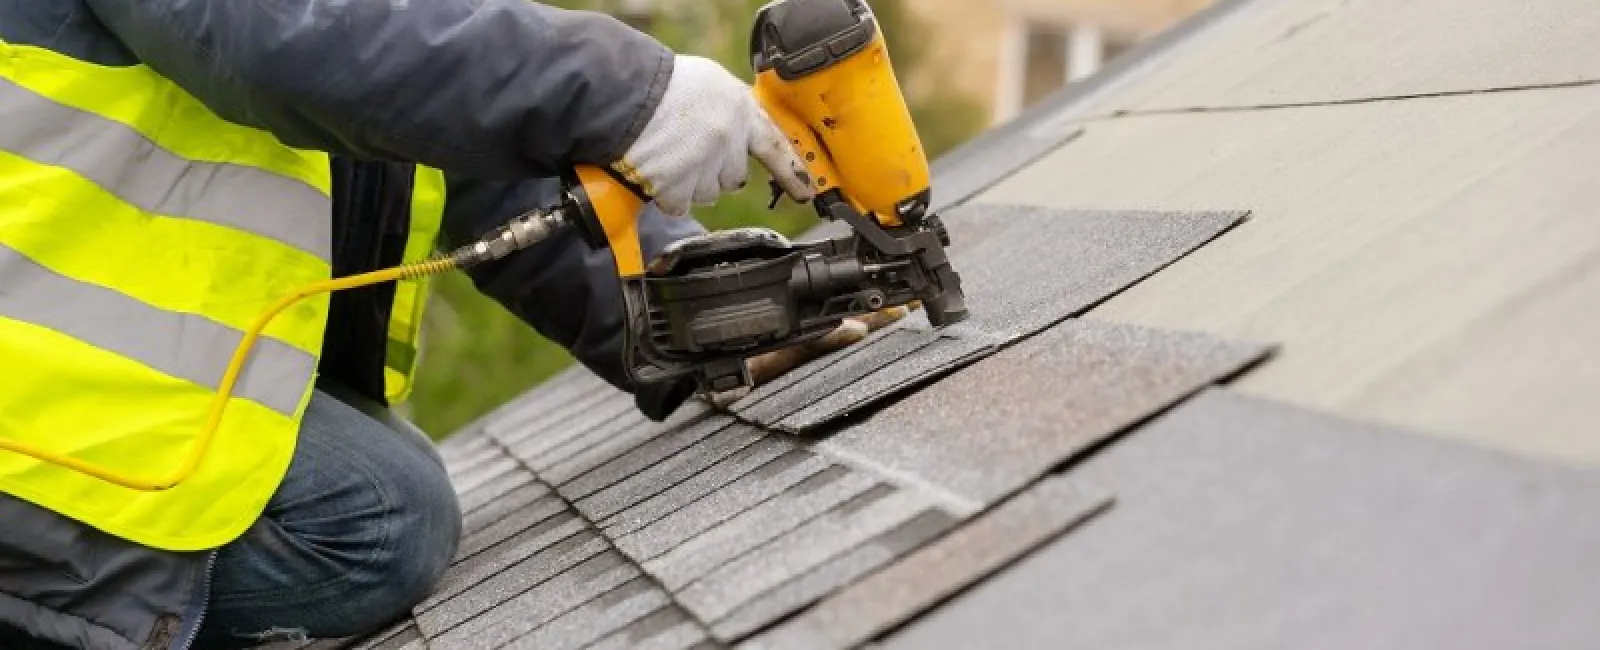 Get Your Roof Fall Ready with This Checklist